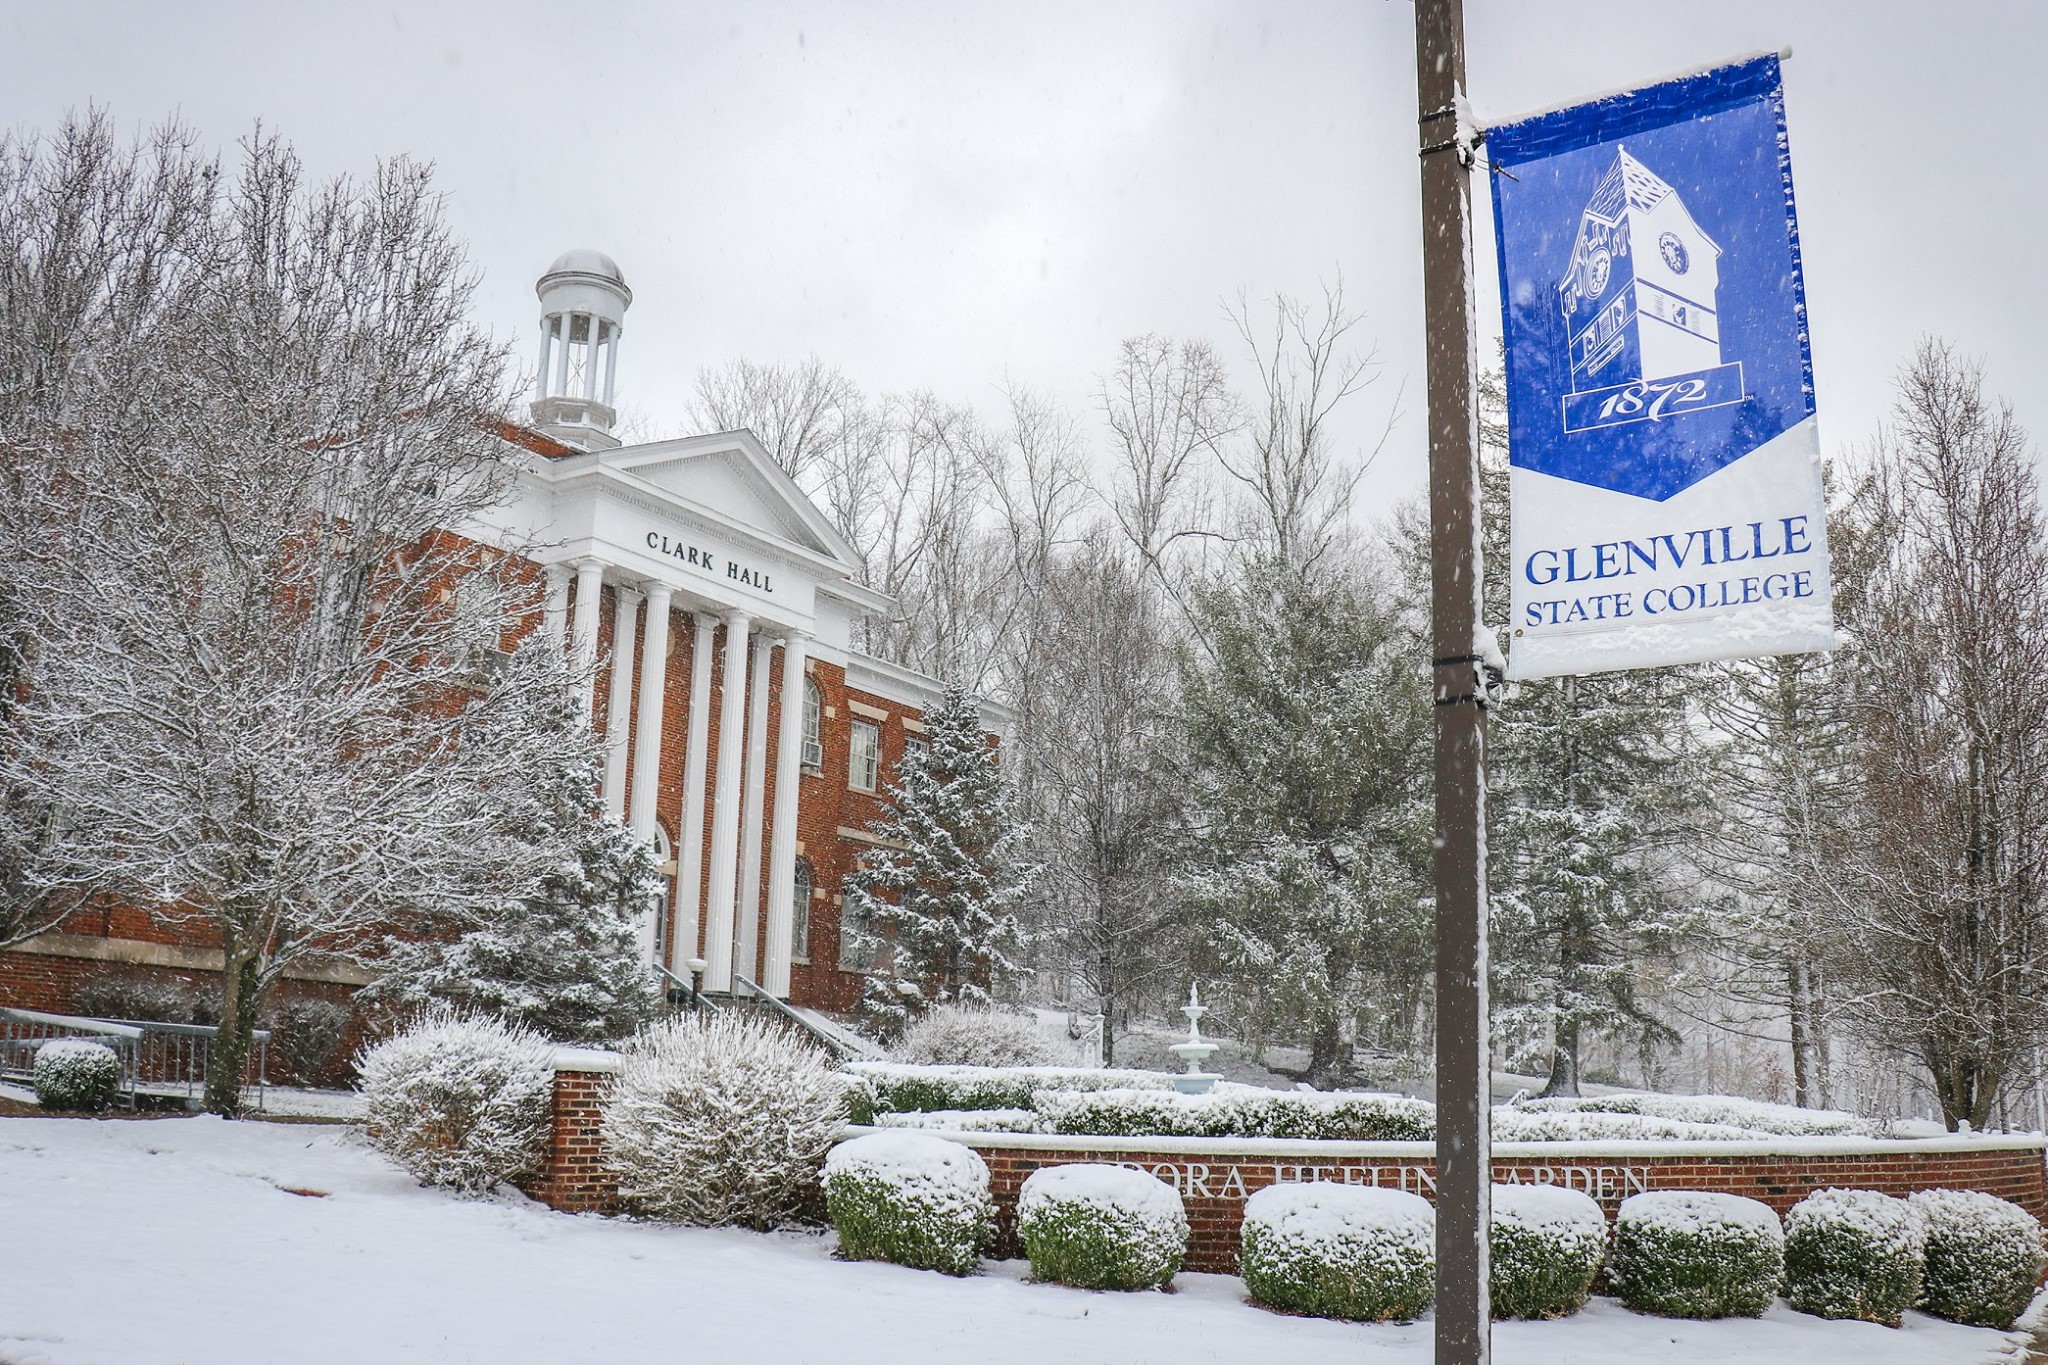 Heavy snow falls on the garden in front of the stately Clark Hall. In the foreground, a brilliant blue Glenville State College banner hangs from a lamp post. Trees, bushes and the ground are covered with several inches of snow.